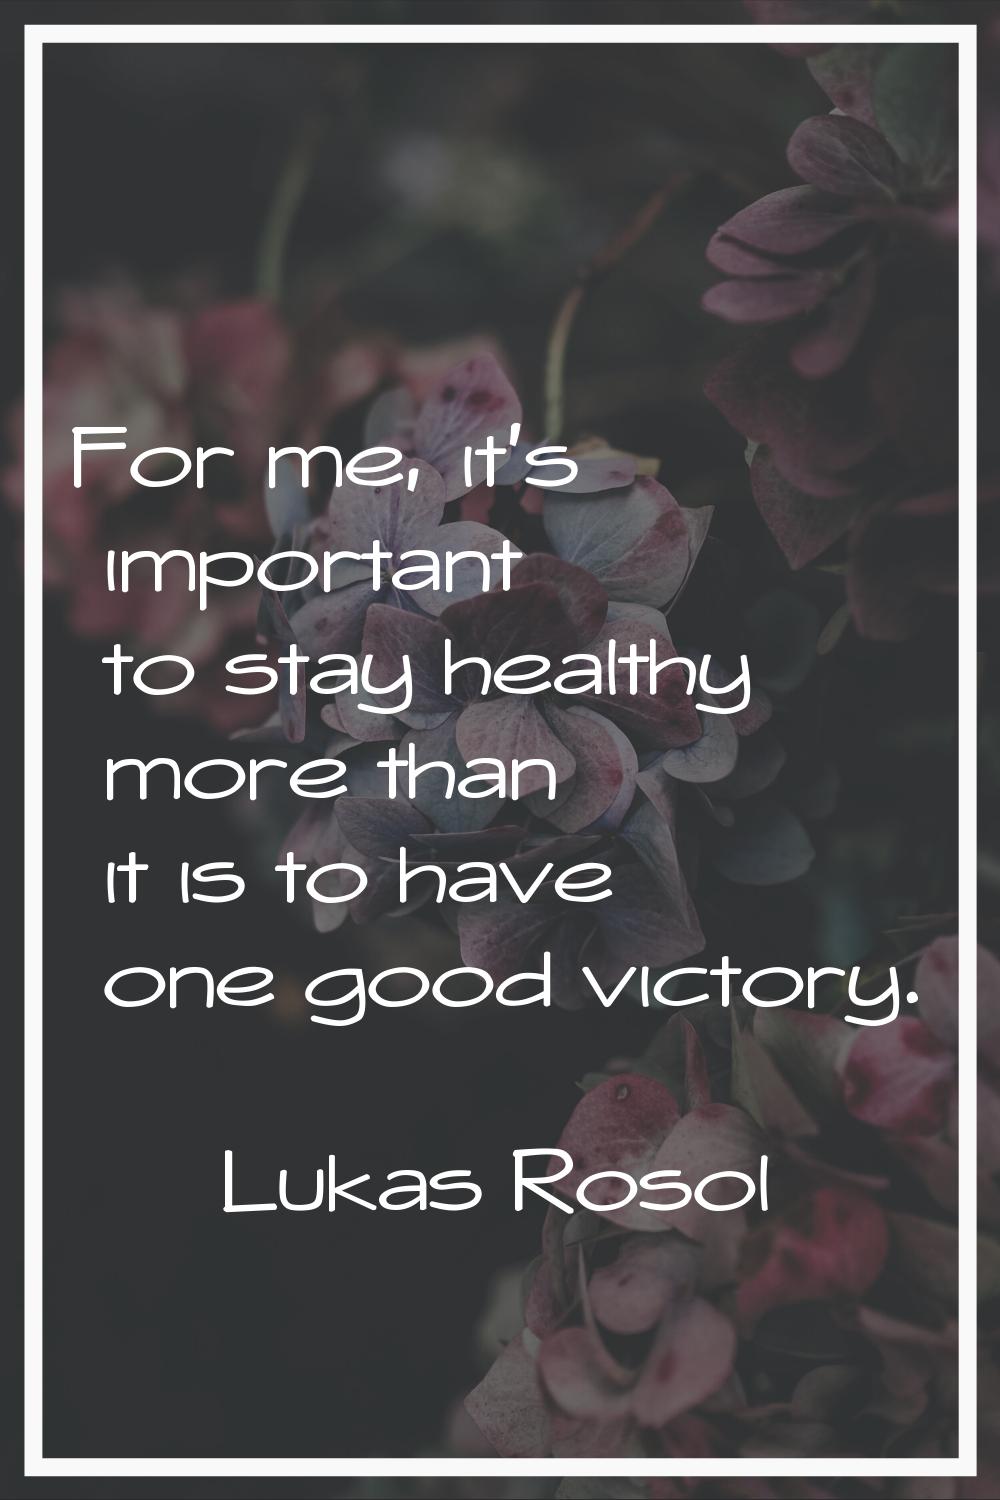 For me, it's important to stay healthy more than it is to have one good victory.